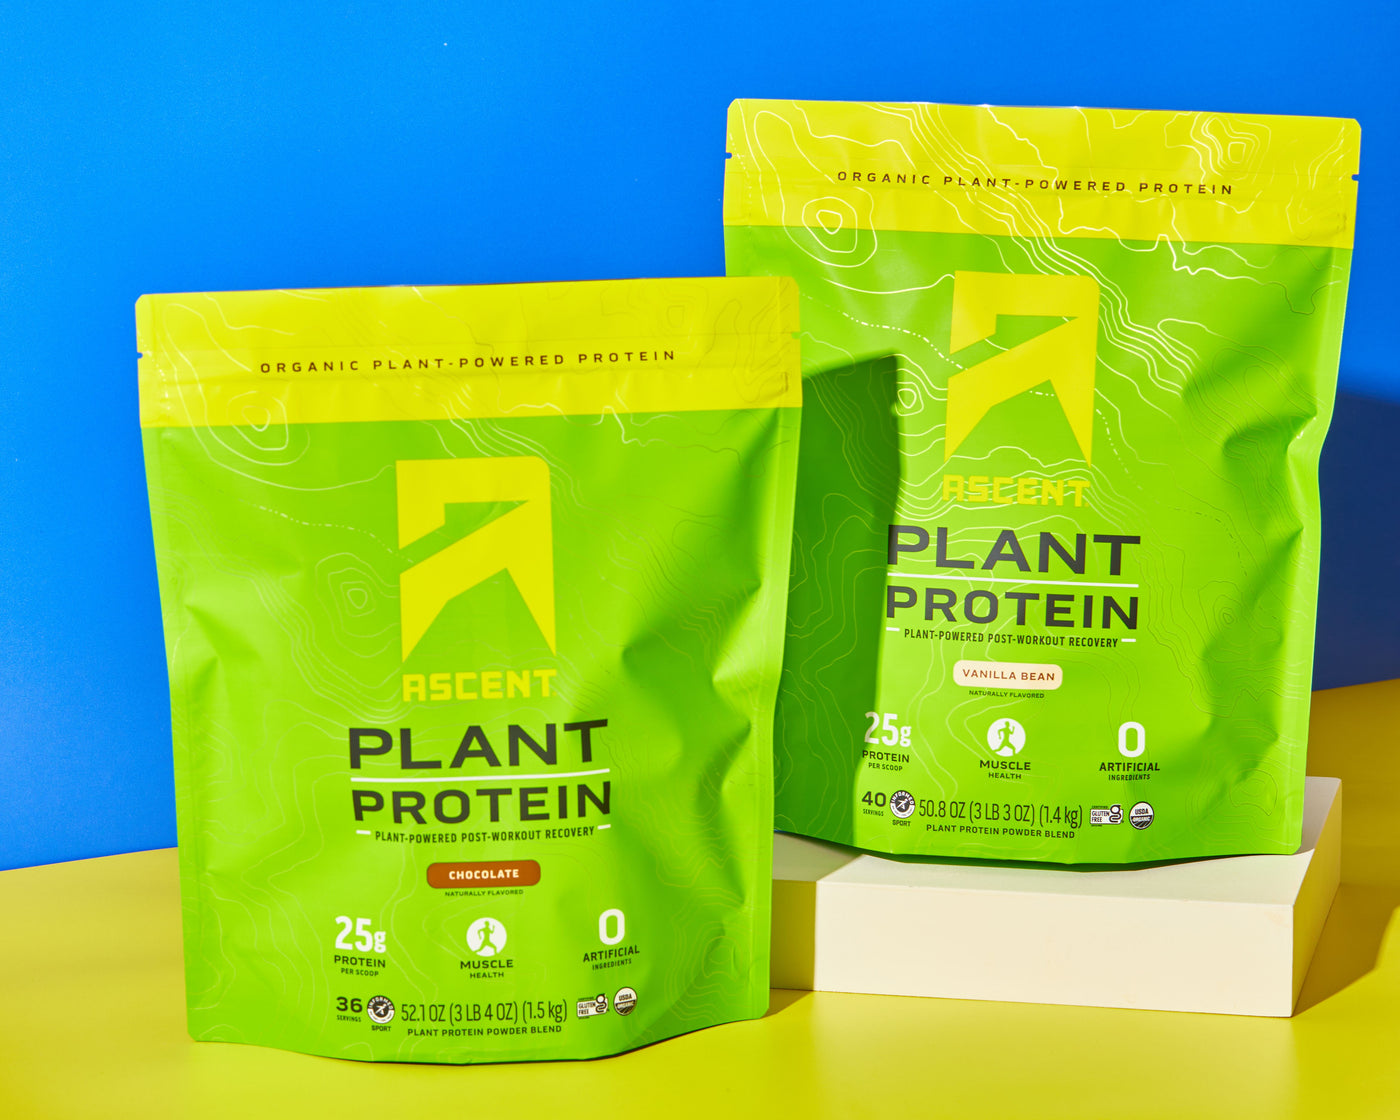 Ascent Plant Protein Now Offered in Kroger Stores Nationwide